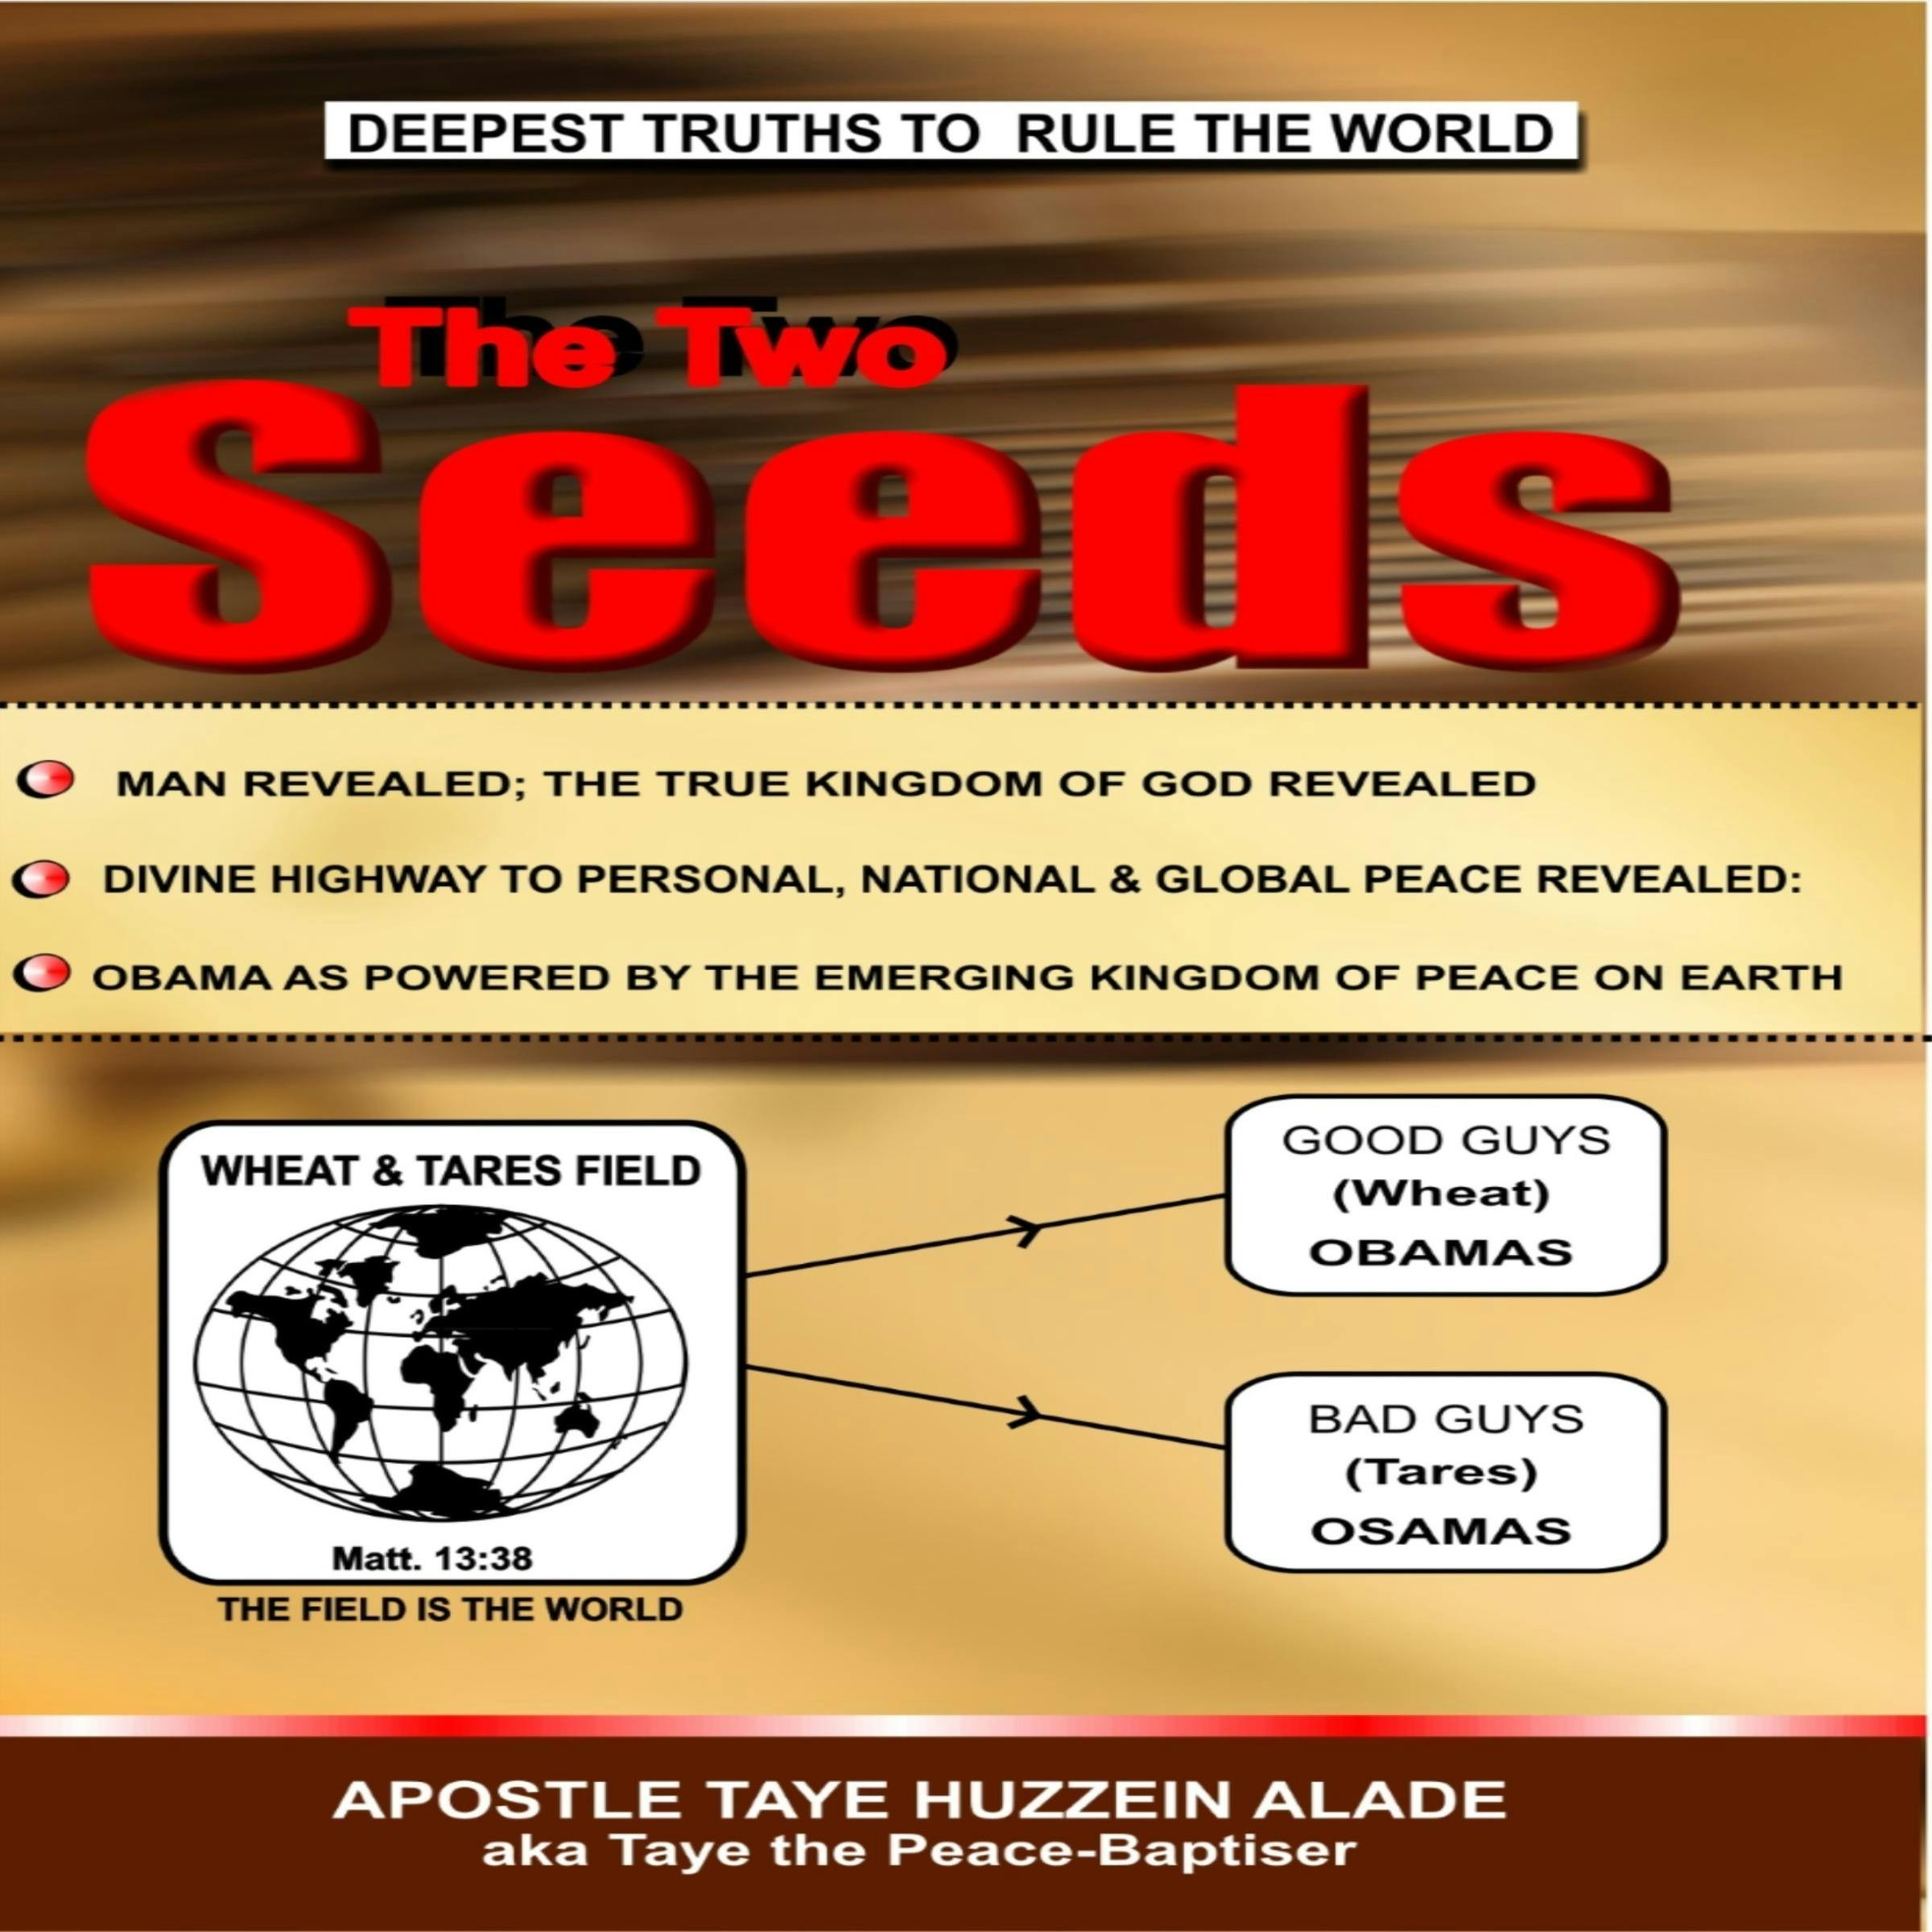 The Two Seeds: Deepest Truths to Rule the World - Apostle Taye Huzzein Alade